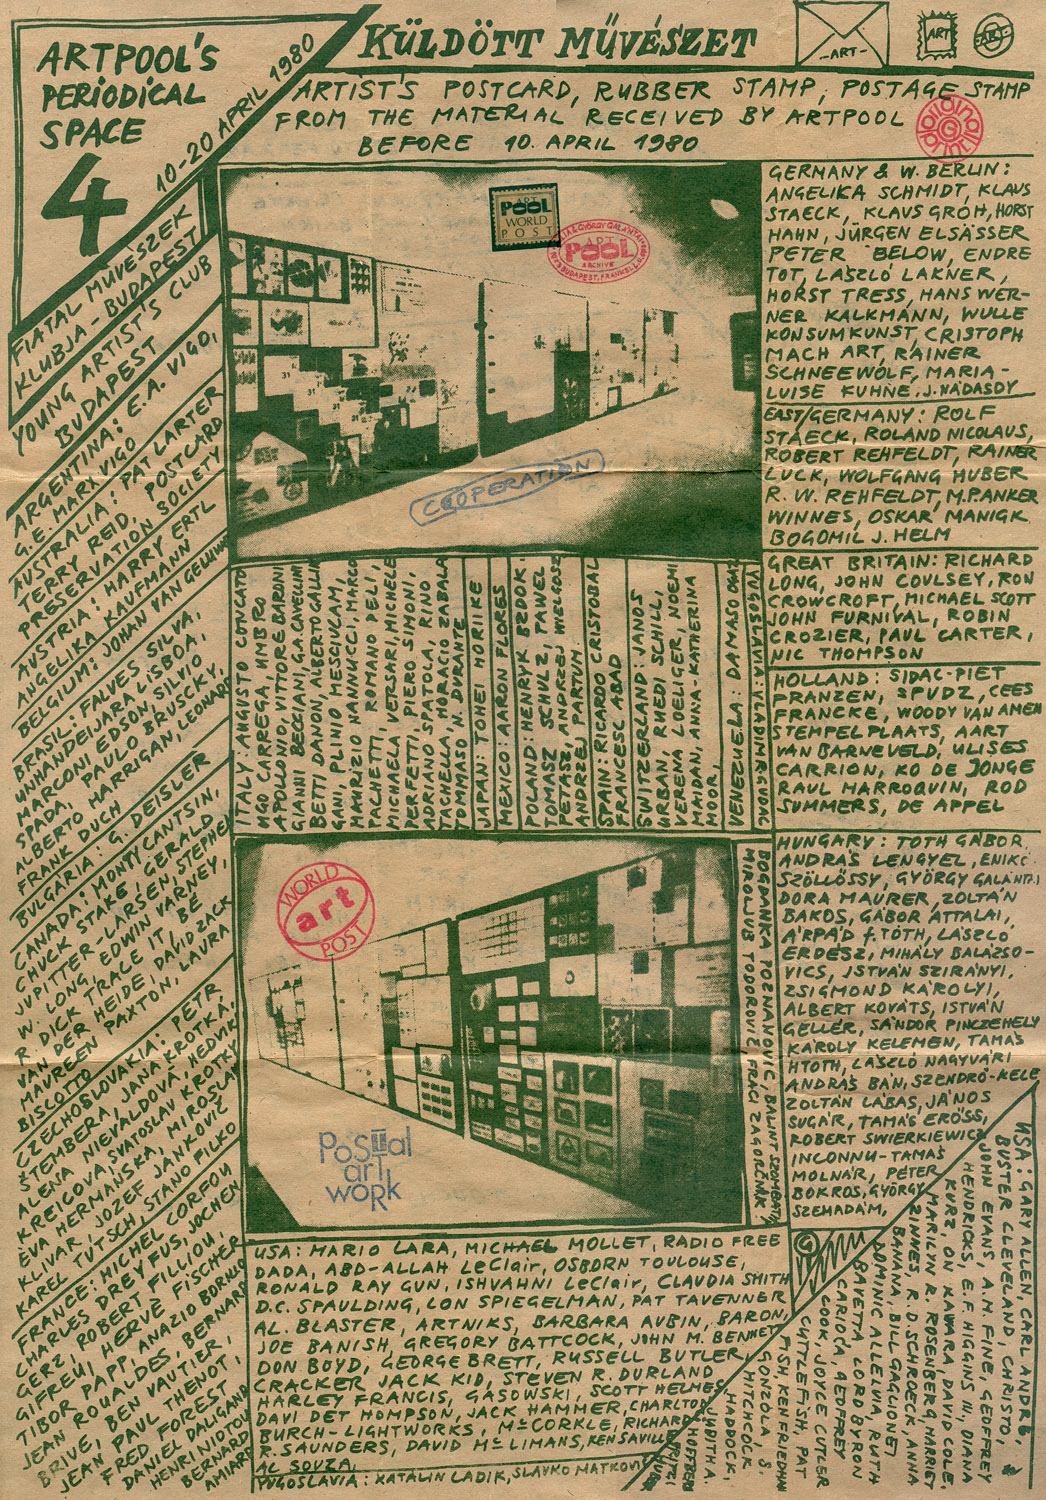 Silc-screened poster for APS4, Artpool's first big international mail art exhibition, Young Artists' Club, Budapest, April 1980(1st and 2nd page)